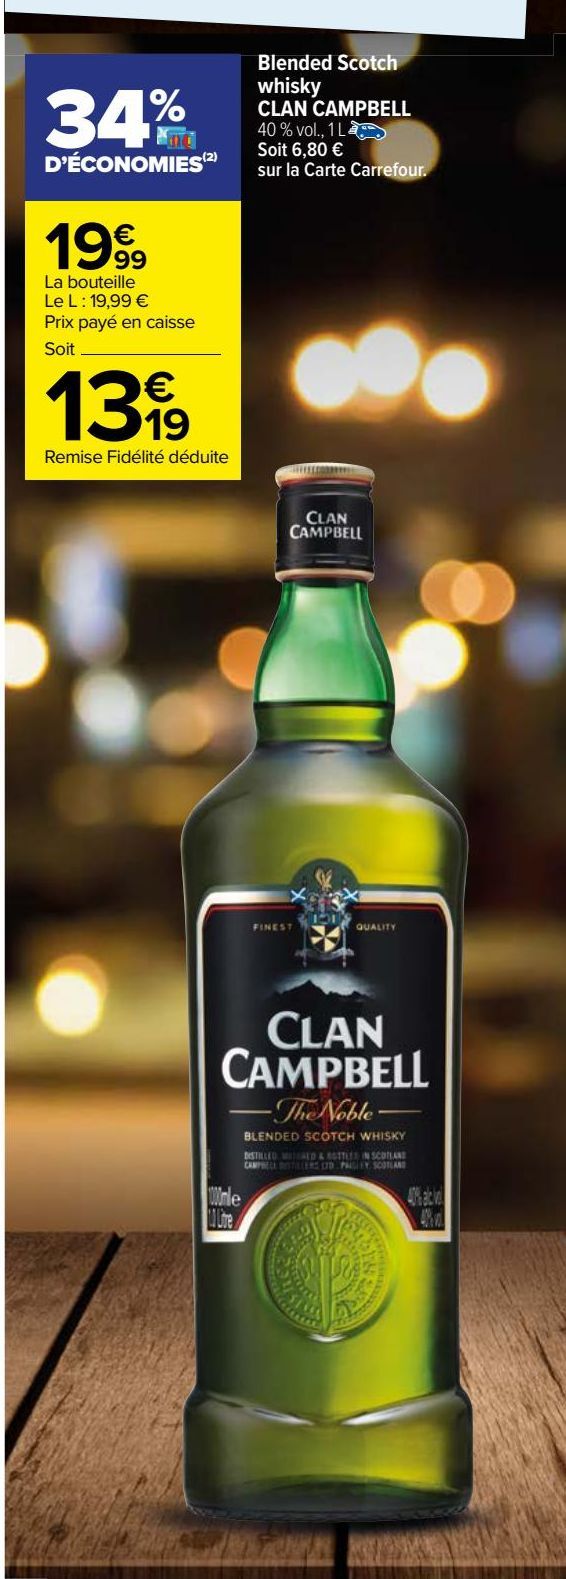 blended scotch whisky Clan campbell